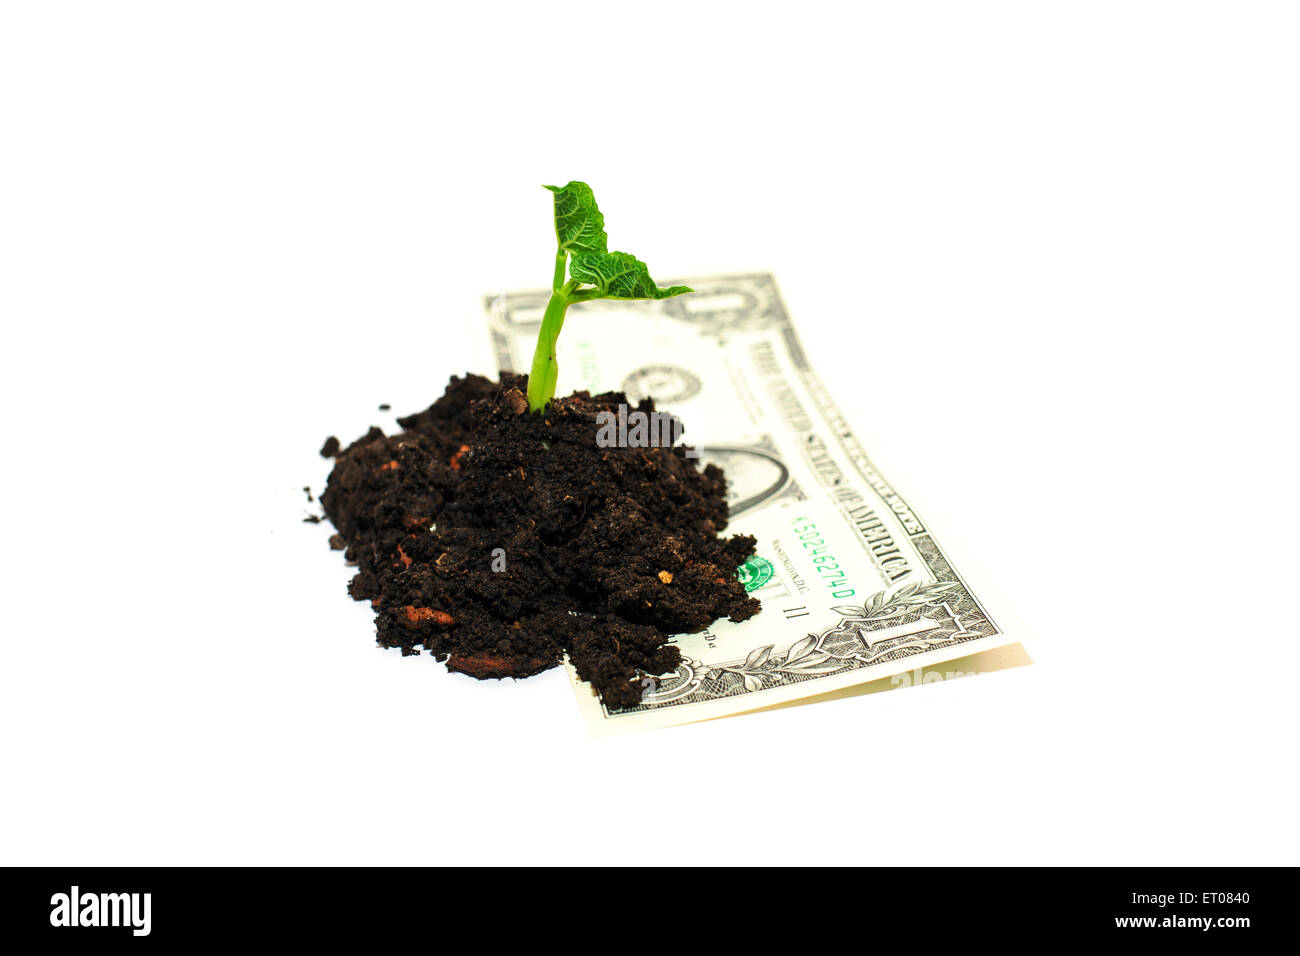 Green plant growing from a pile of soil and banknote on a white background Stock Photo